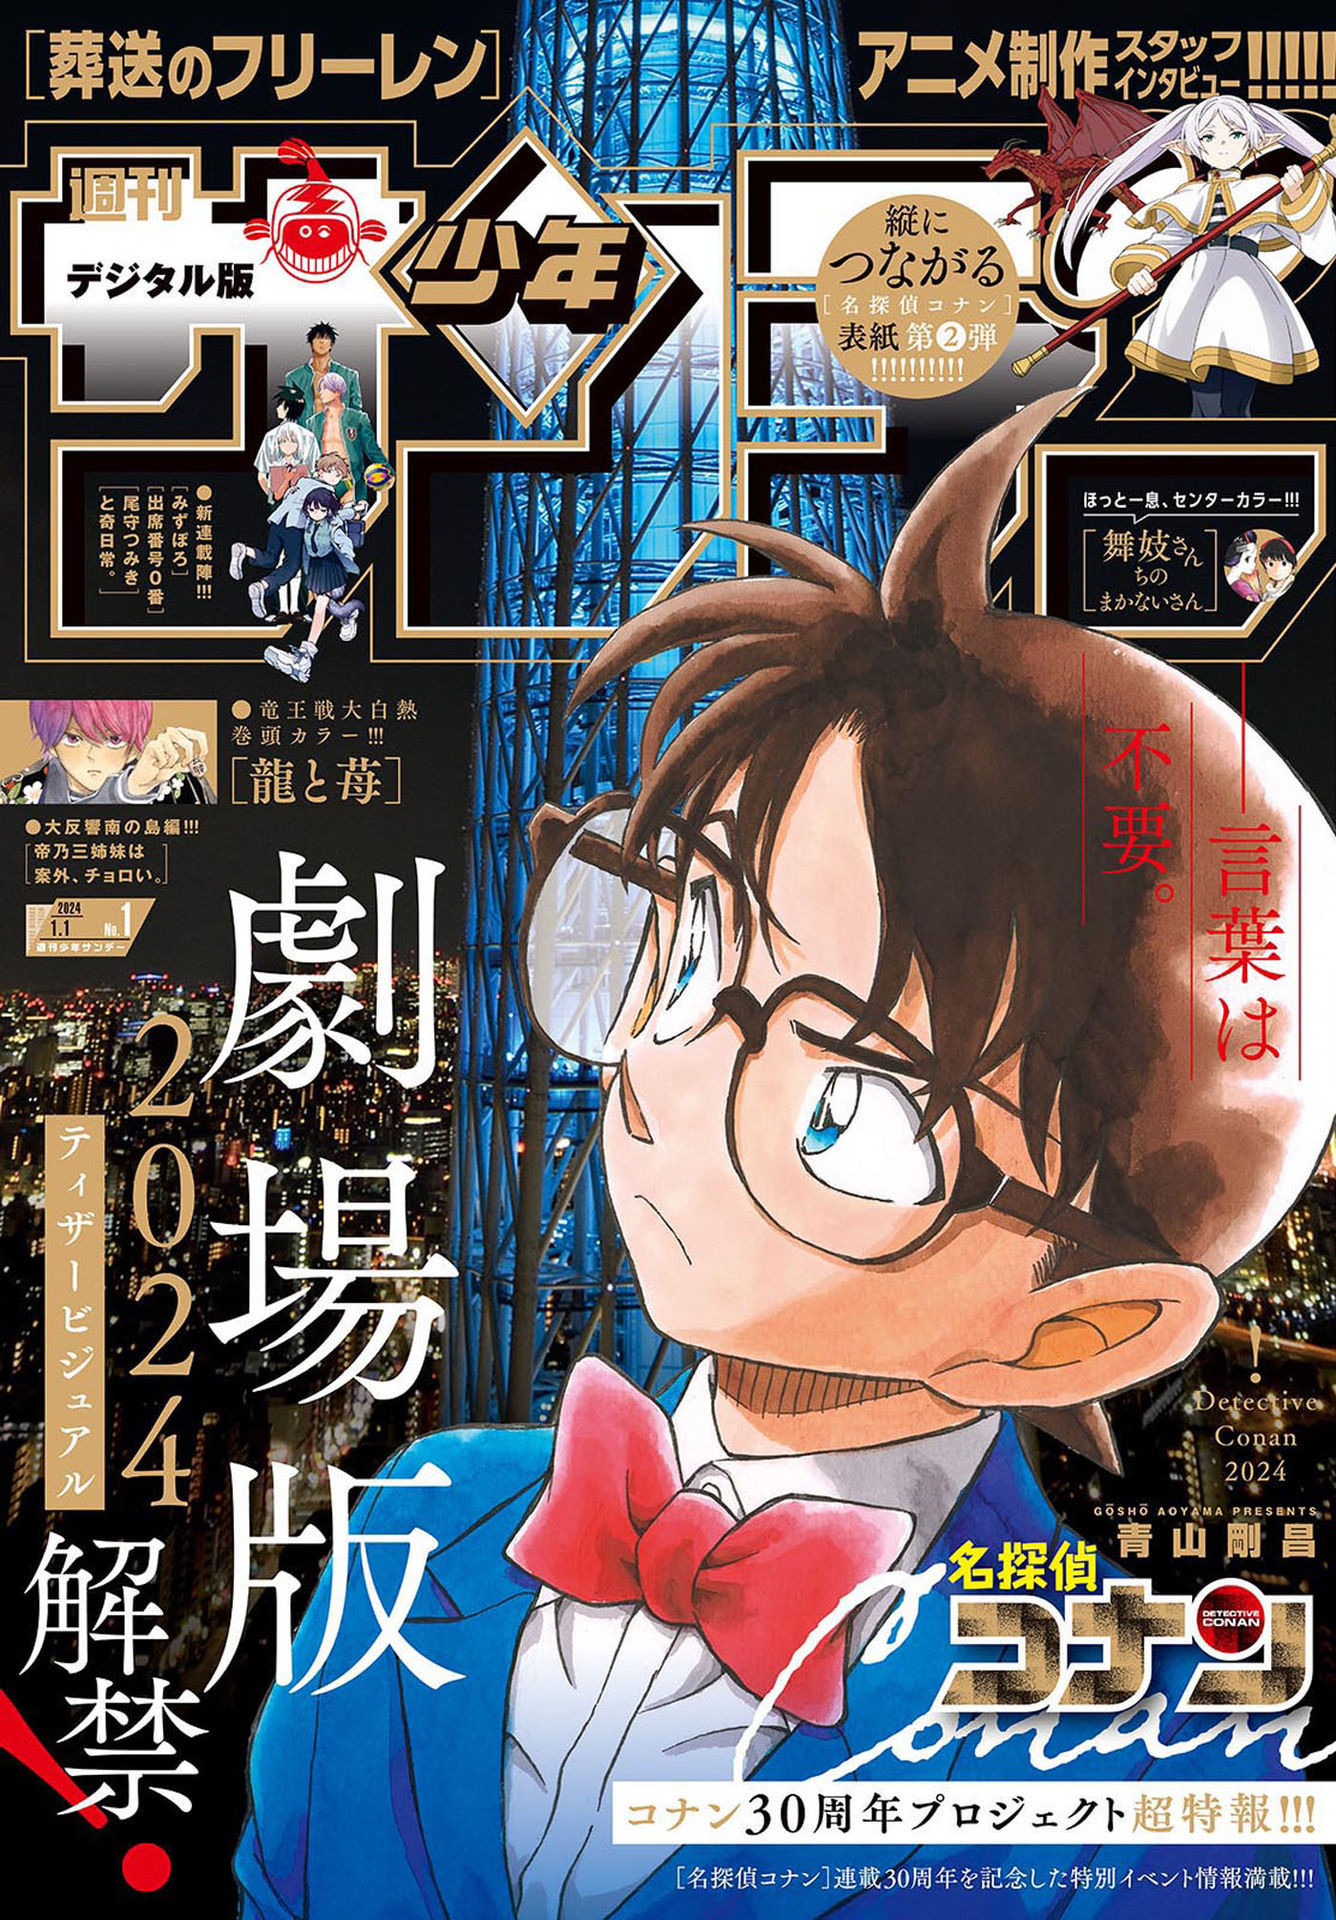 Detective Conan - Chapter 1122 - Page 1